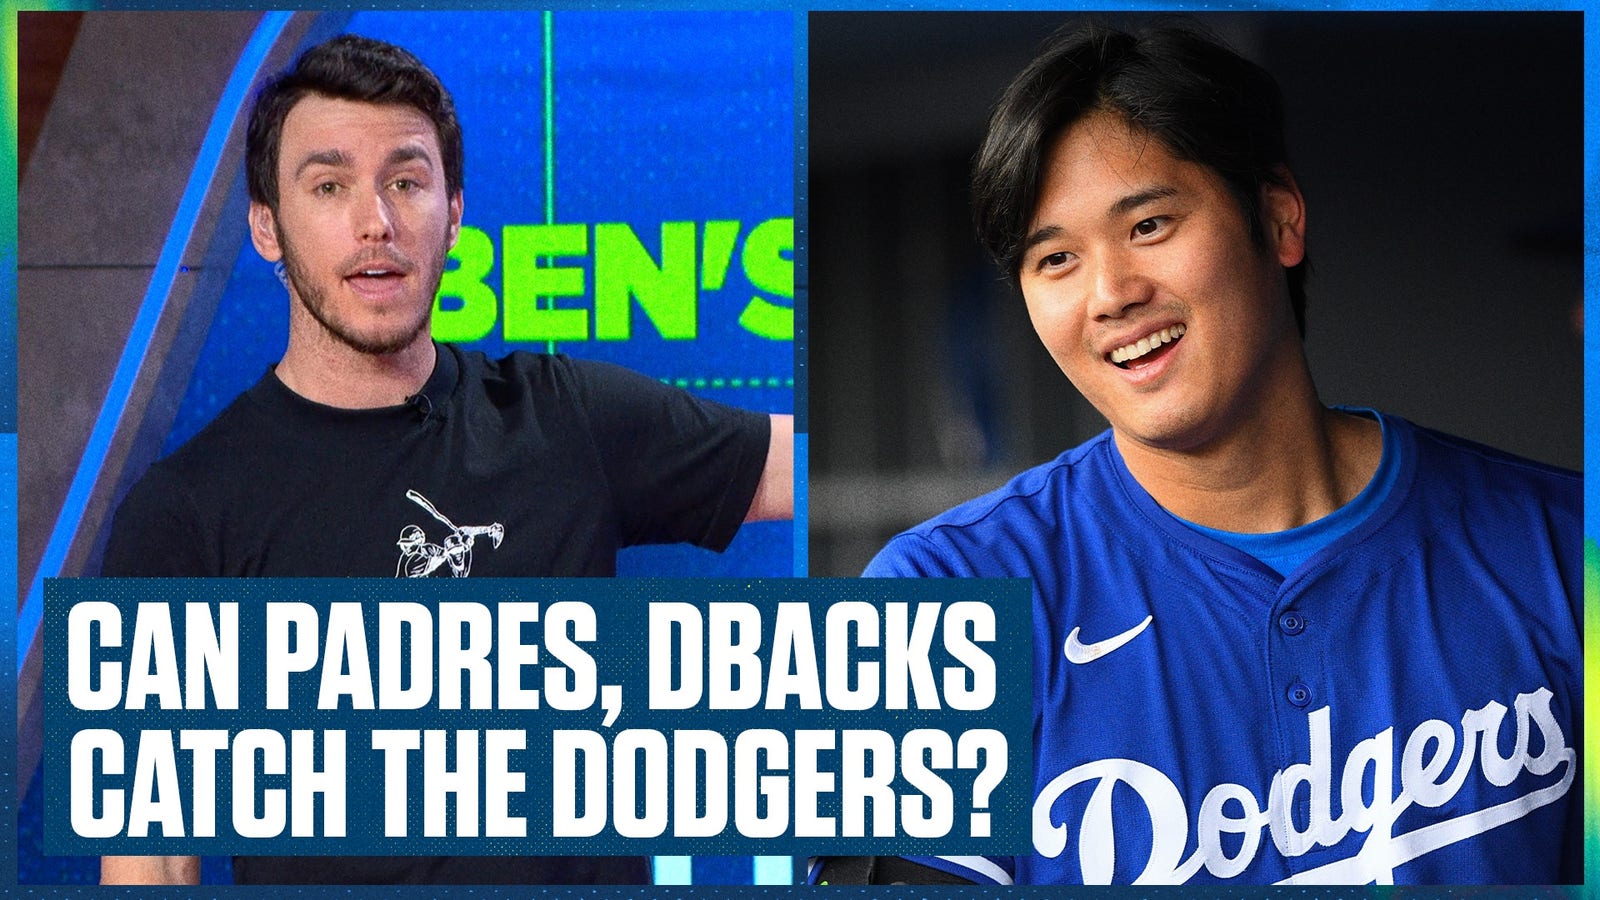 Dodgers run the NL West, but can Padres or D-backs make the playoffs, too?